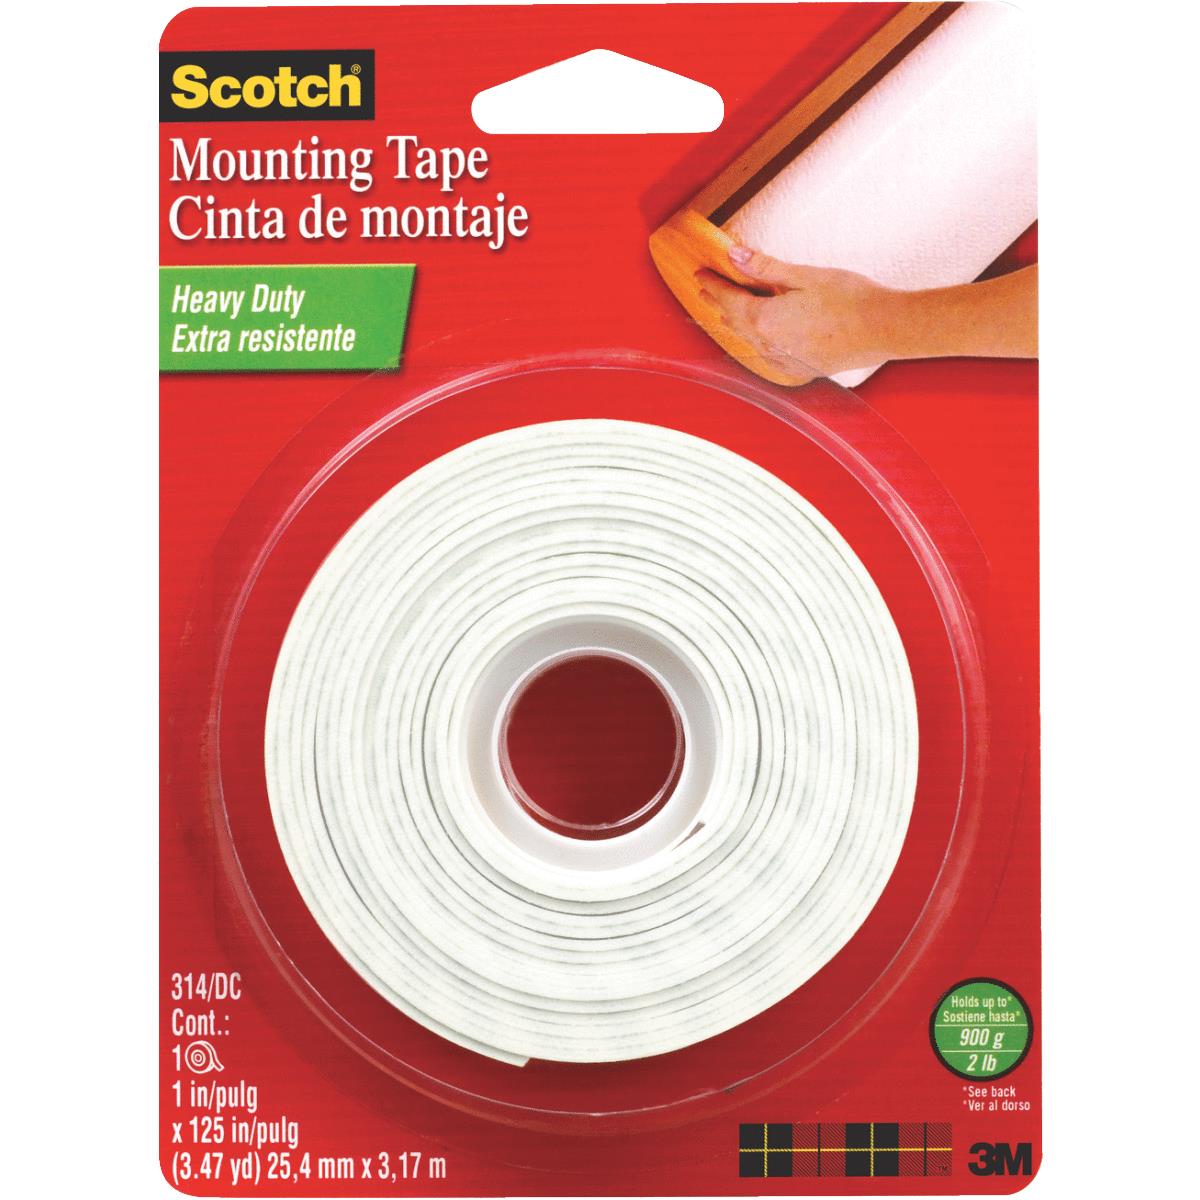 3 PACK 3M Scotch Heavy Duty Mounting Tape Clear 